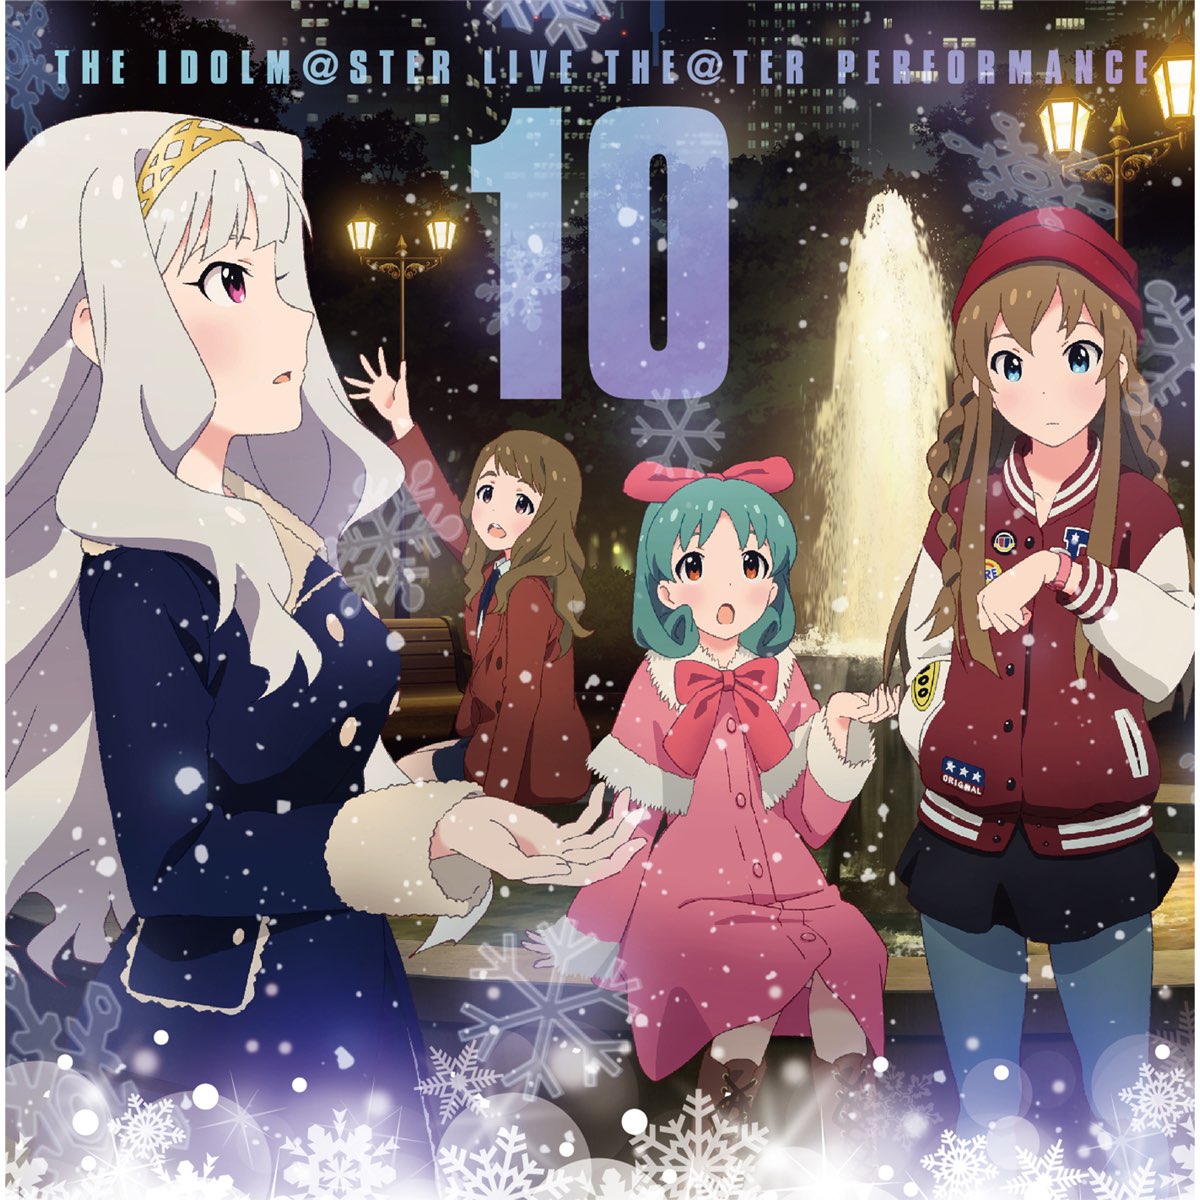 THE IDOLM@STER LIVE THE@TER PERFORMANCE 10 - EP - Album by Takane